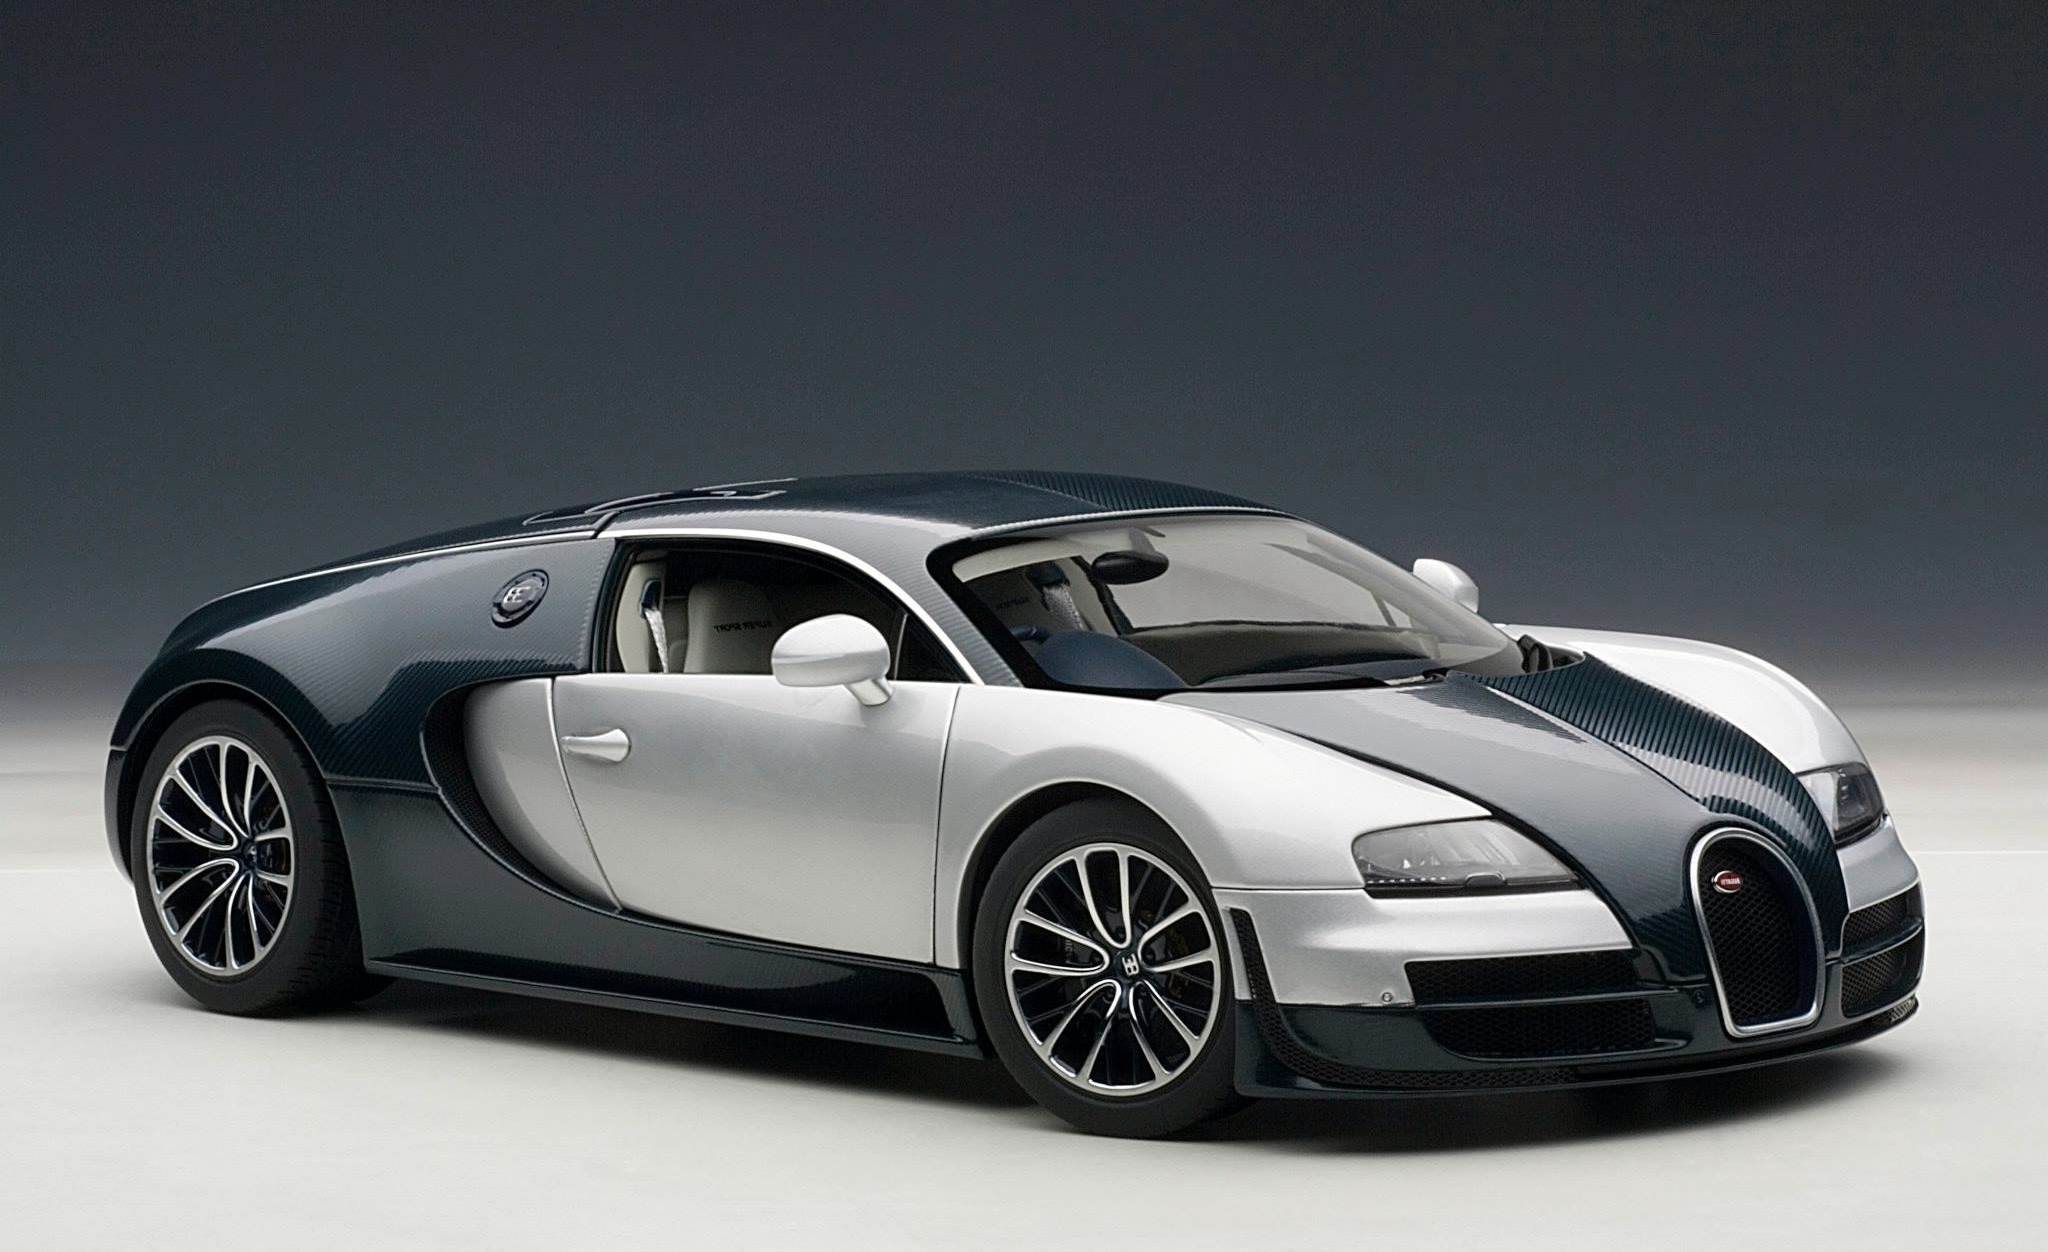 Free download White And Black Bugatti Veyron Wallpaper image 136 [2048x1252] for your Desktop, Mobile & Tablet. Explore Bugatti Veyron EB Wallpaper. Bugatti Veyron EB Wallpaper, Bugatti Veyron EB